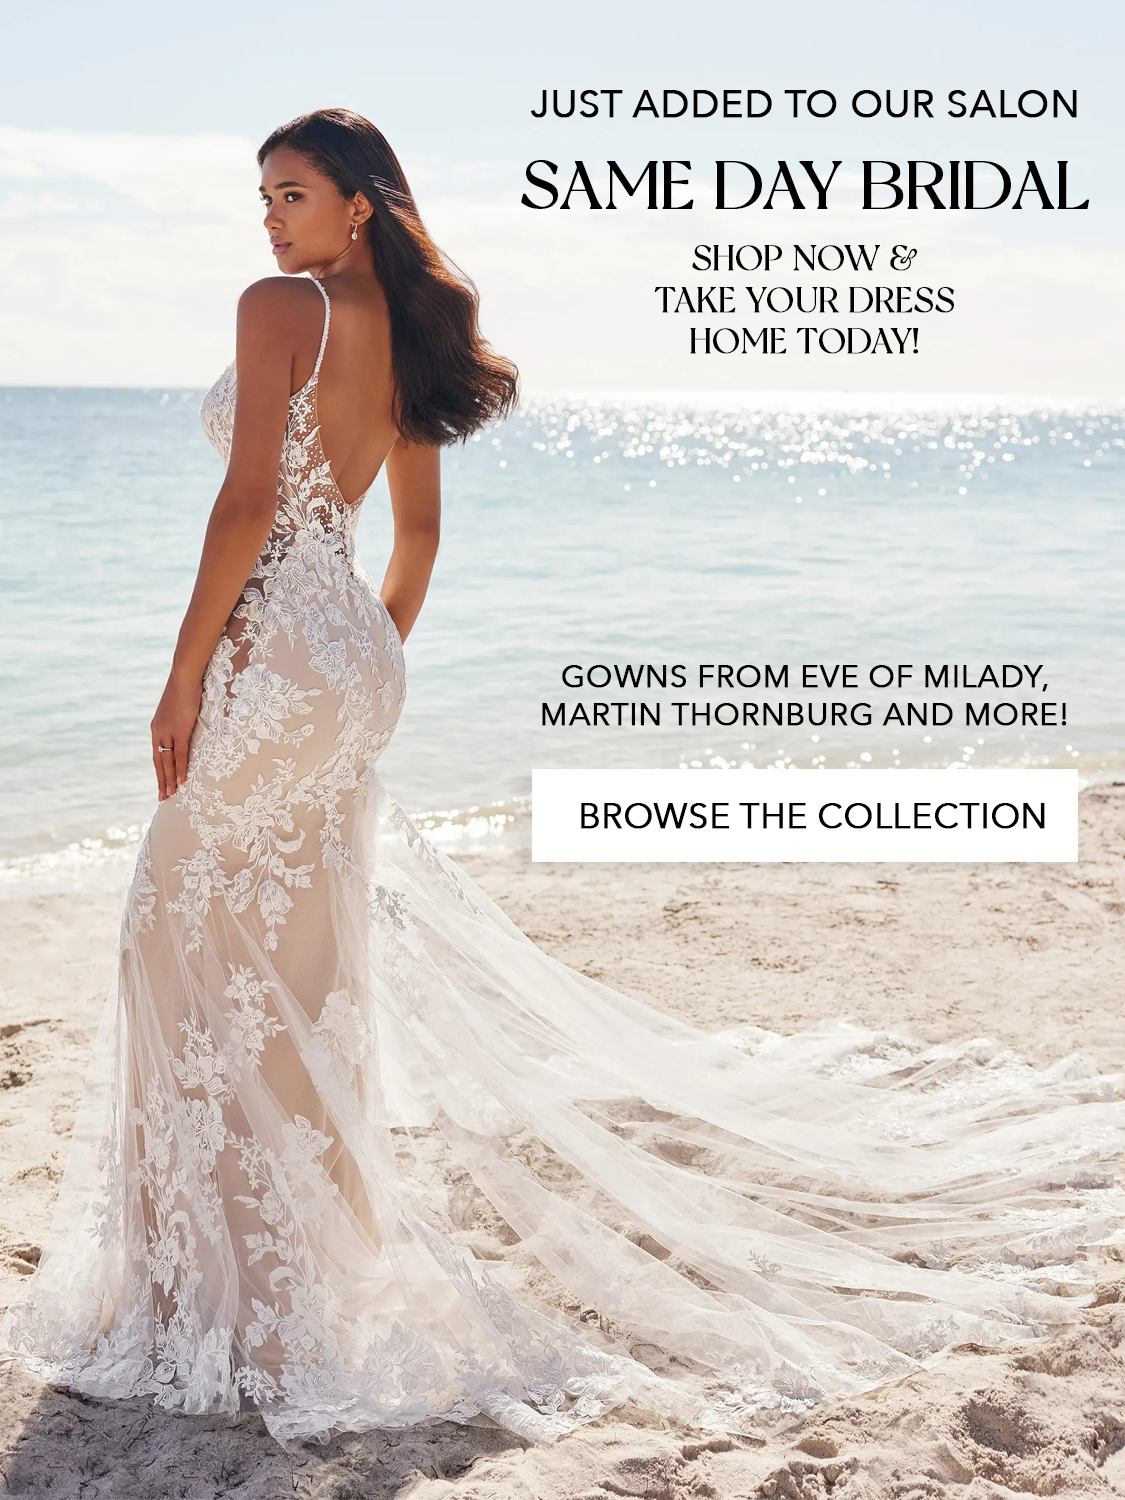 Same Day Bridal - Now Available